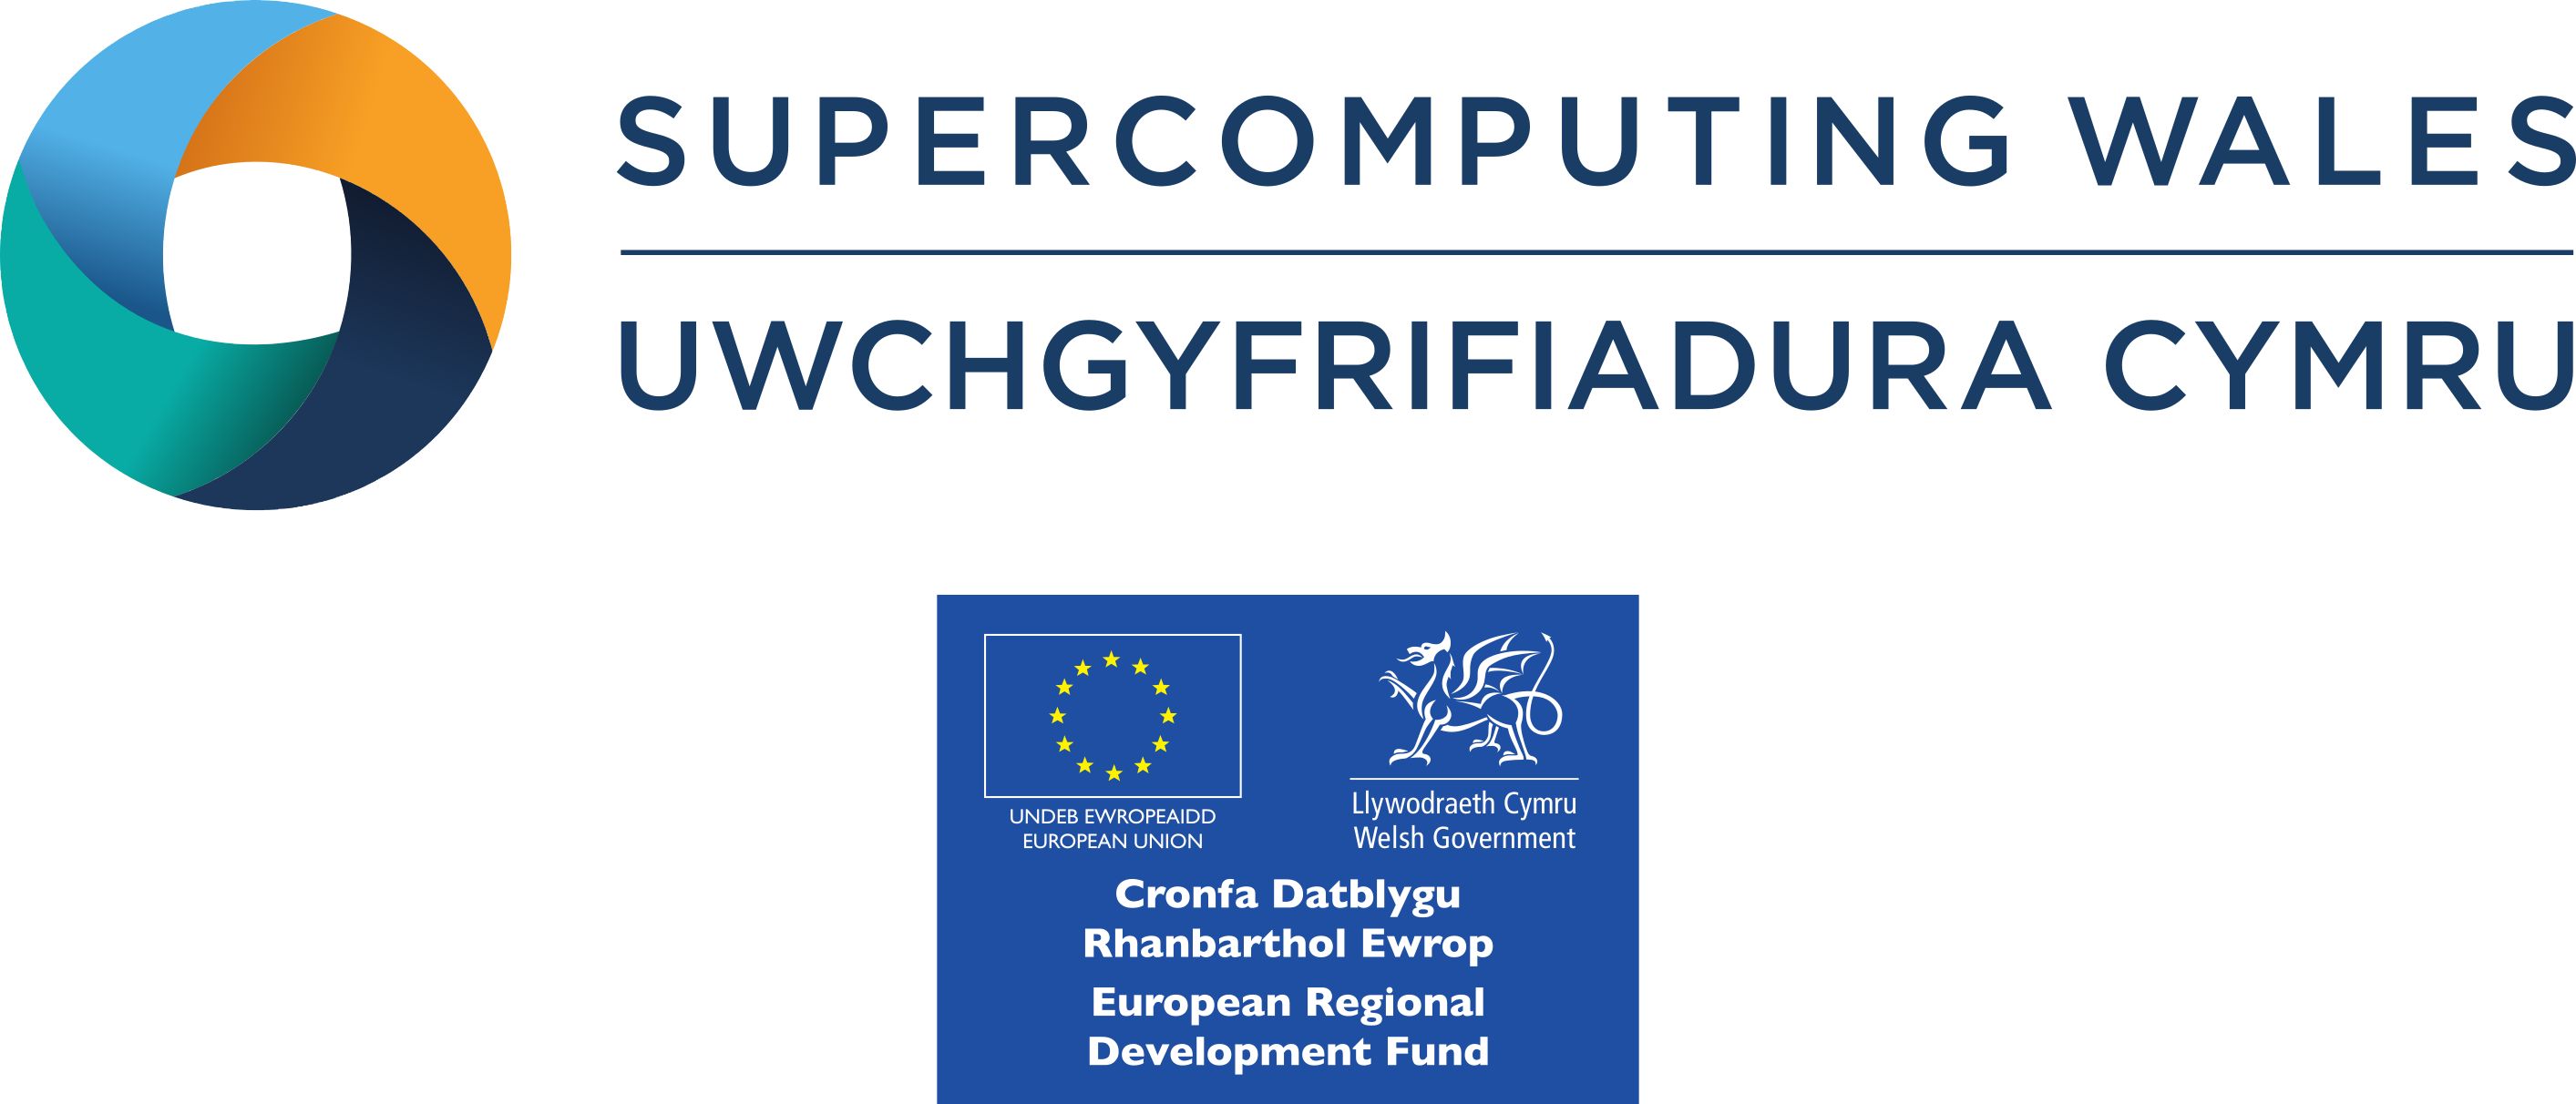 Supercomputing Wales is part-funded by the European Regional Development Fund through Welsh Government.